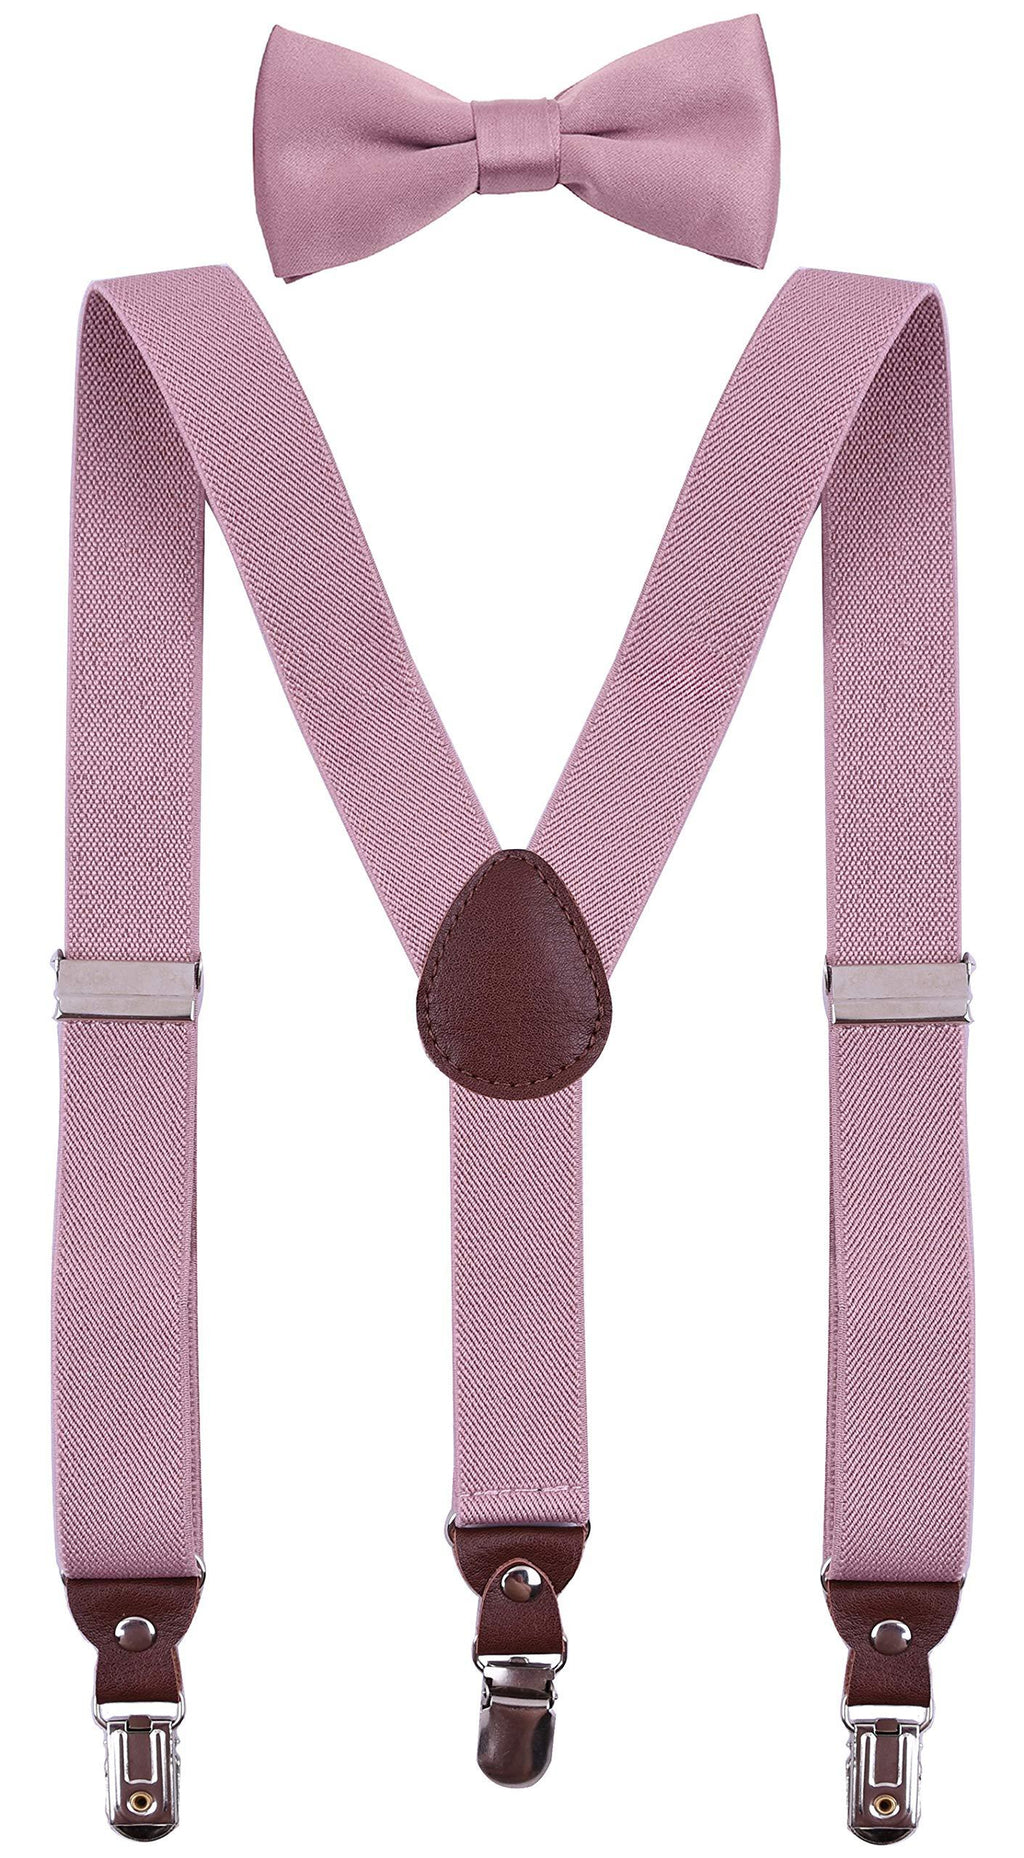 [Australia] - PZLE Men's Boys' Suspenders and Bow Tie Set Adjustable Y Back 24 Inches(0 - 3 yrs) Blush Pink 